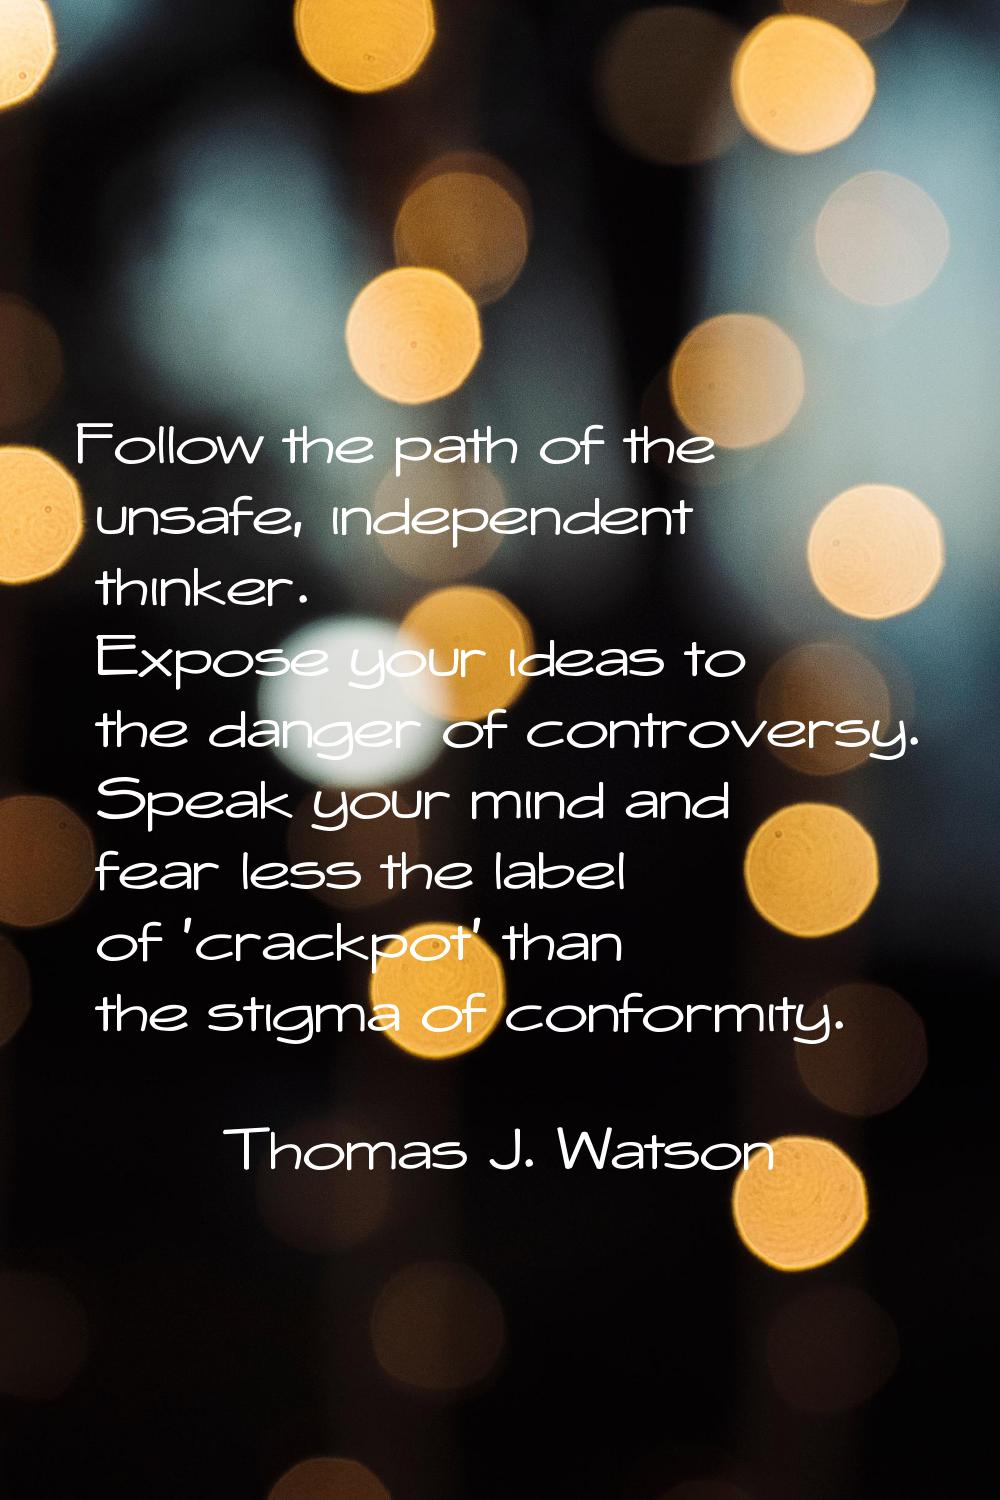 Follow the path of the unsafe, independent thinker. Expose your ideas to the danger of controversy.